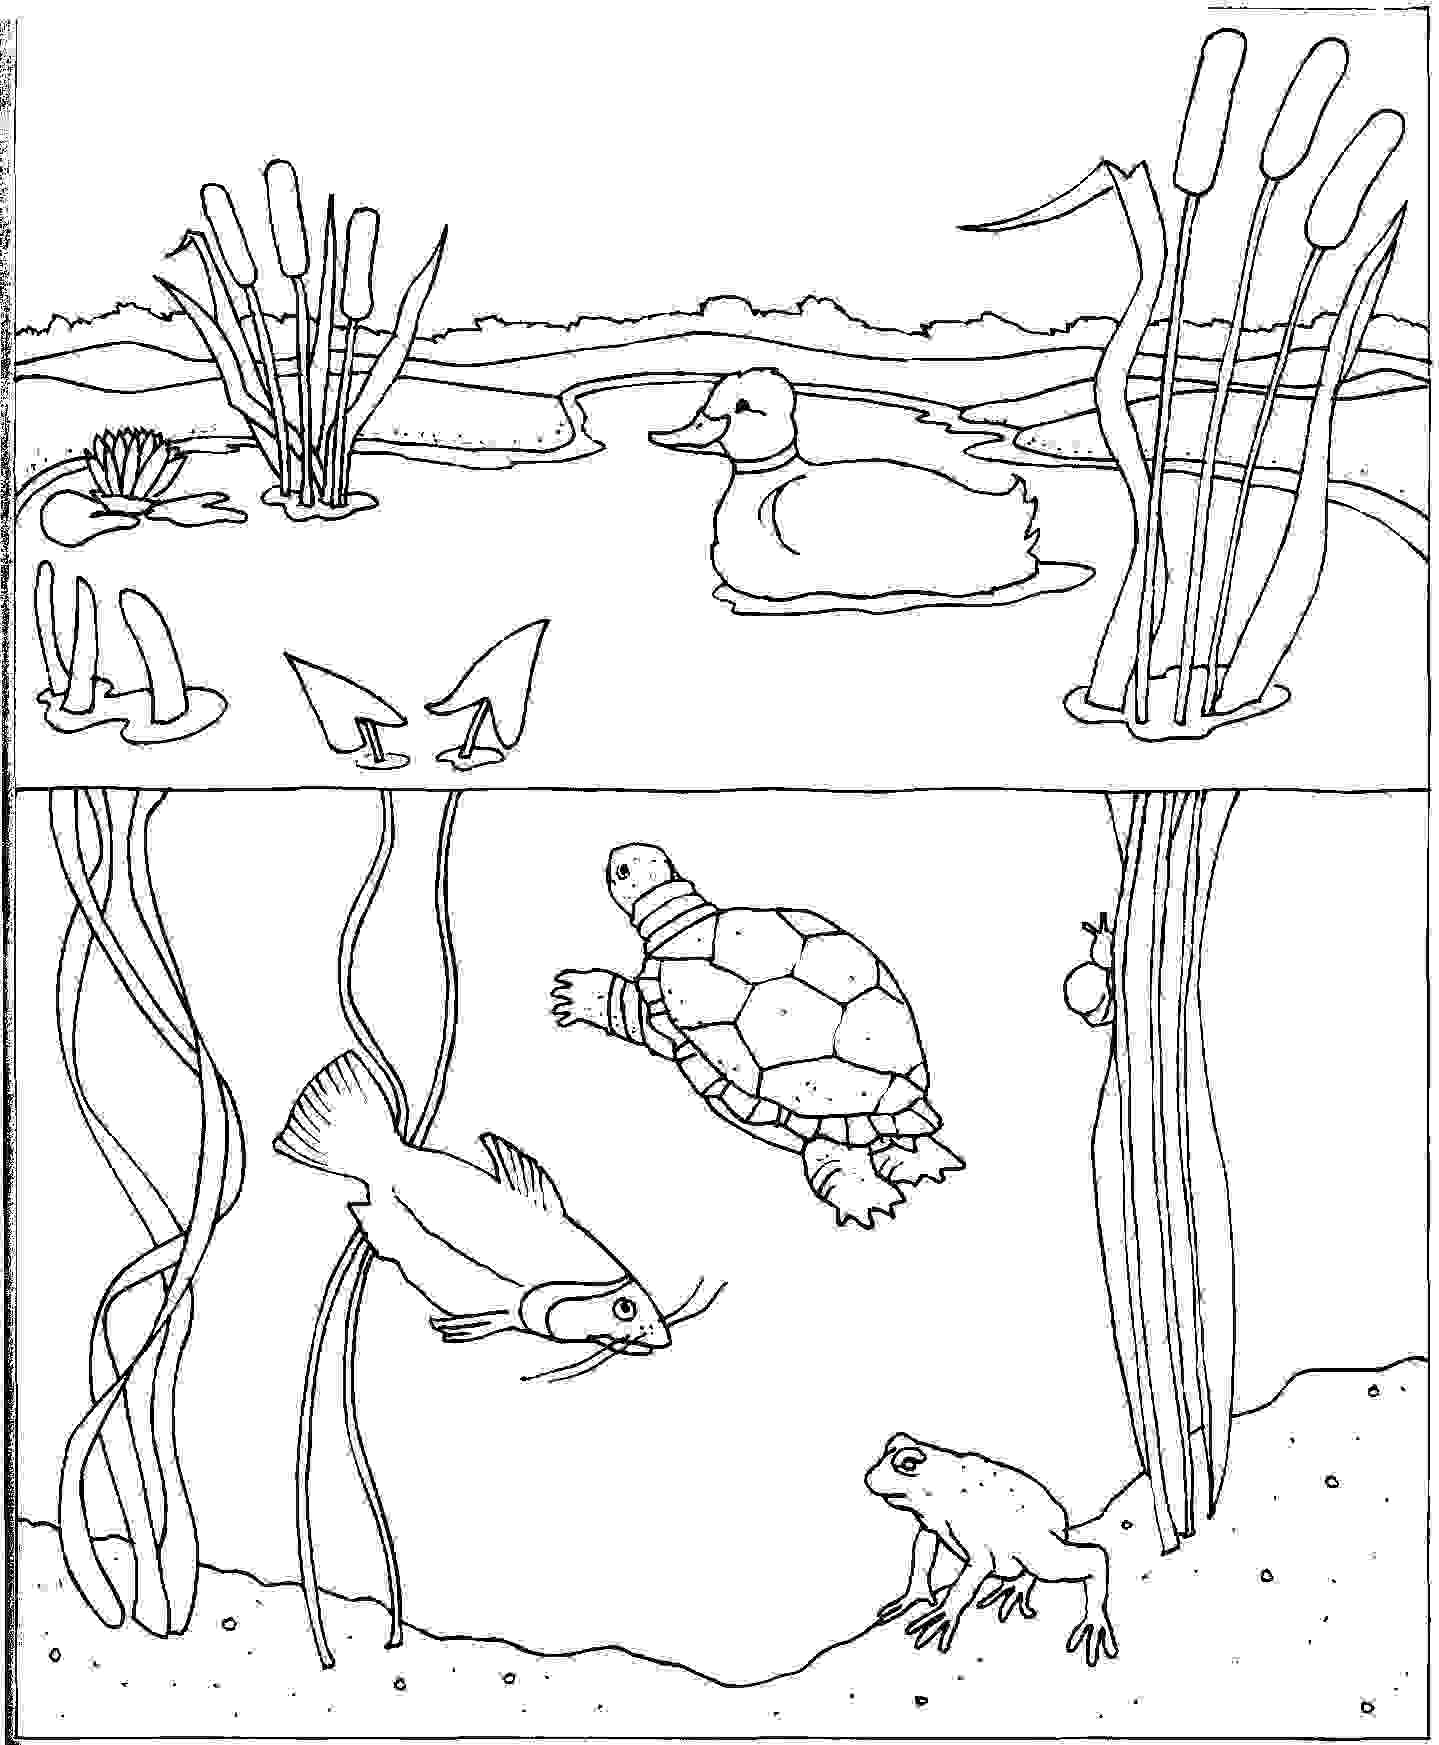 Coloring PAGE WATER CYCLE - Coloring Home